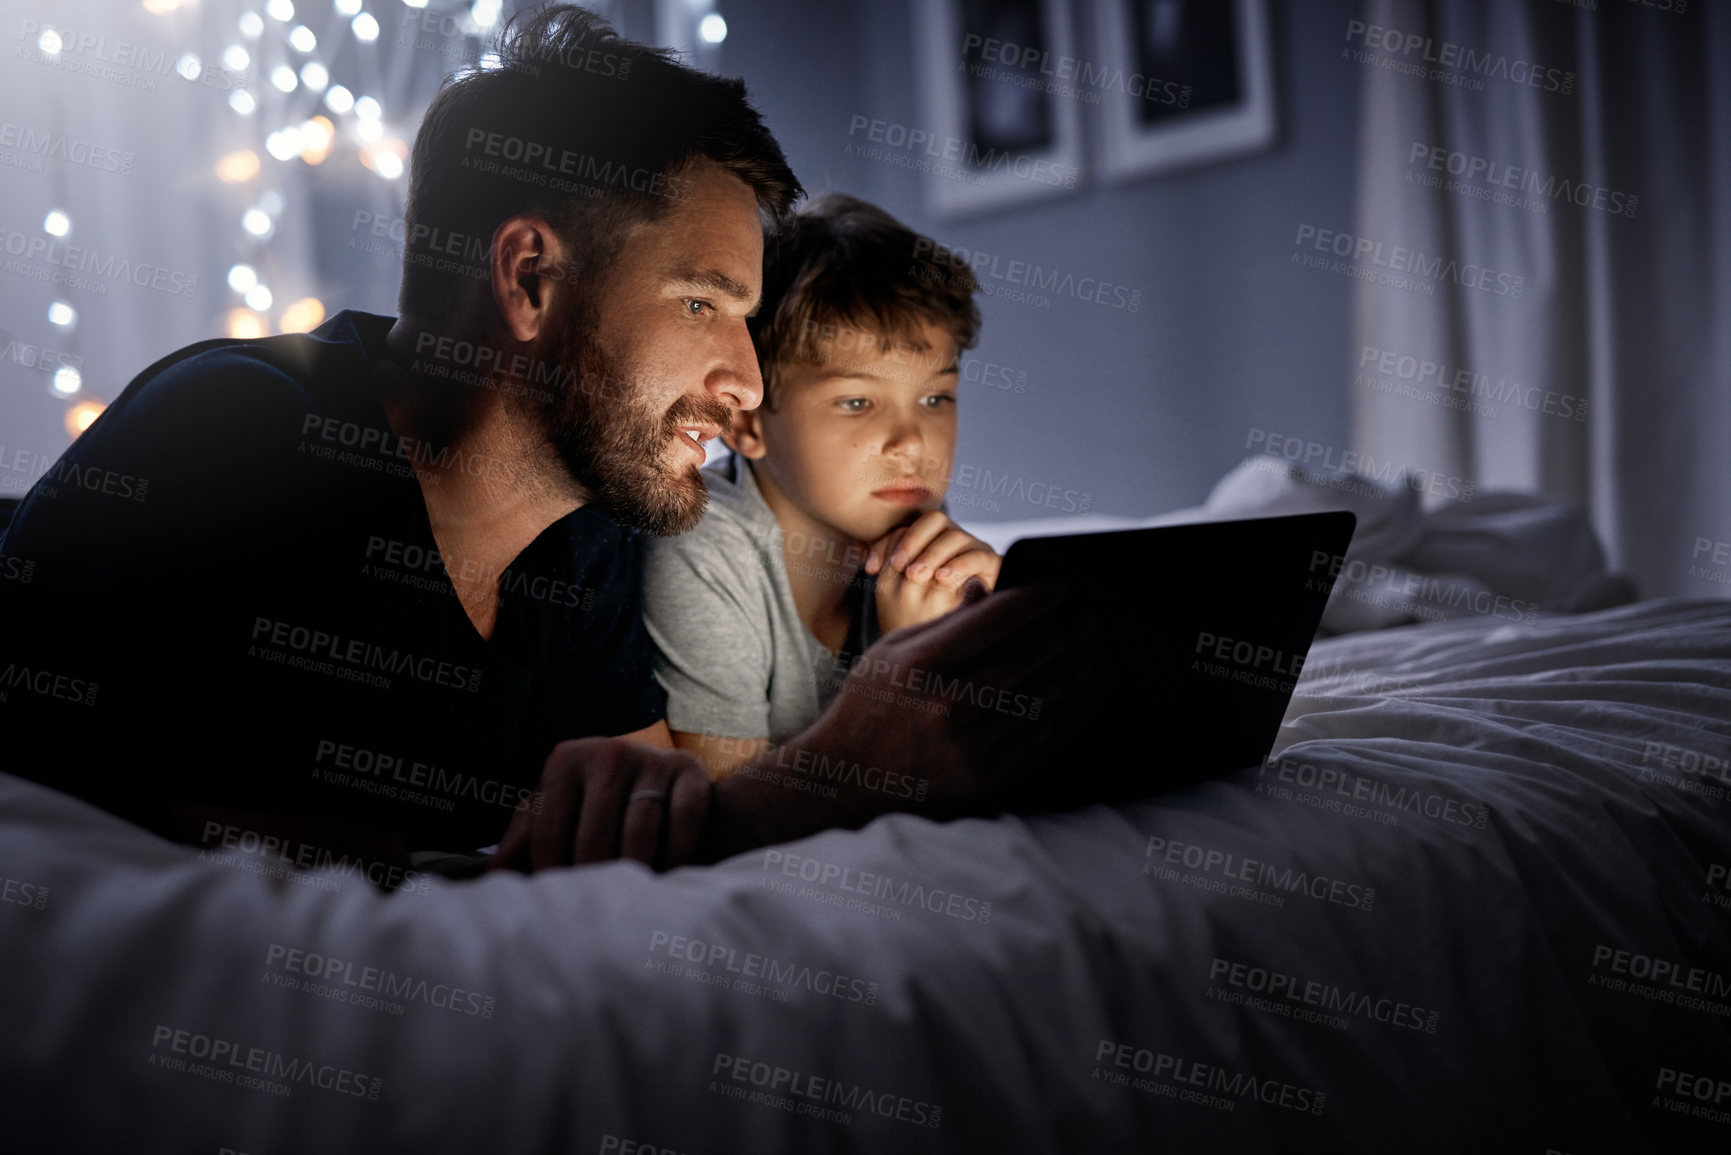 Buy stock photo Shot of a father and his little son using a digital tablet together in bed at night